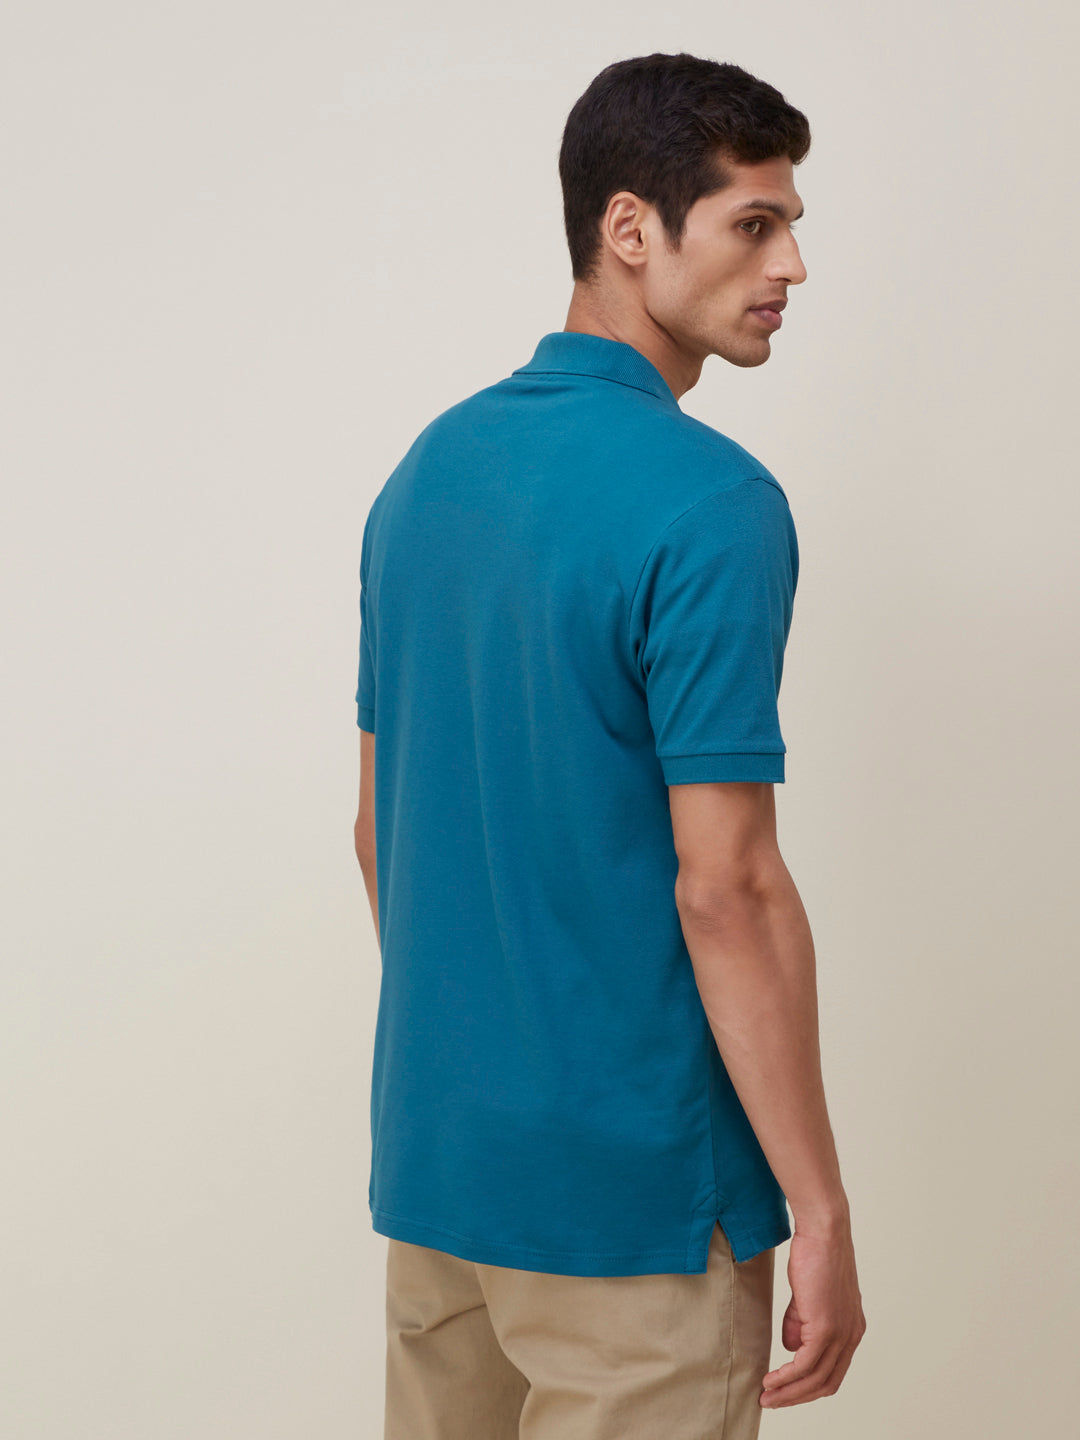 WES Casuals Teal Slim-Fit Polo T-Shirt | Teal Slim-Fit Polo T-Shirt for Men Back View - Westside